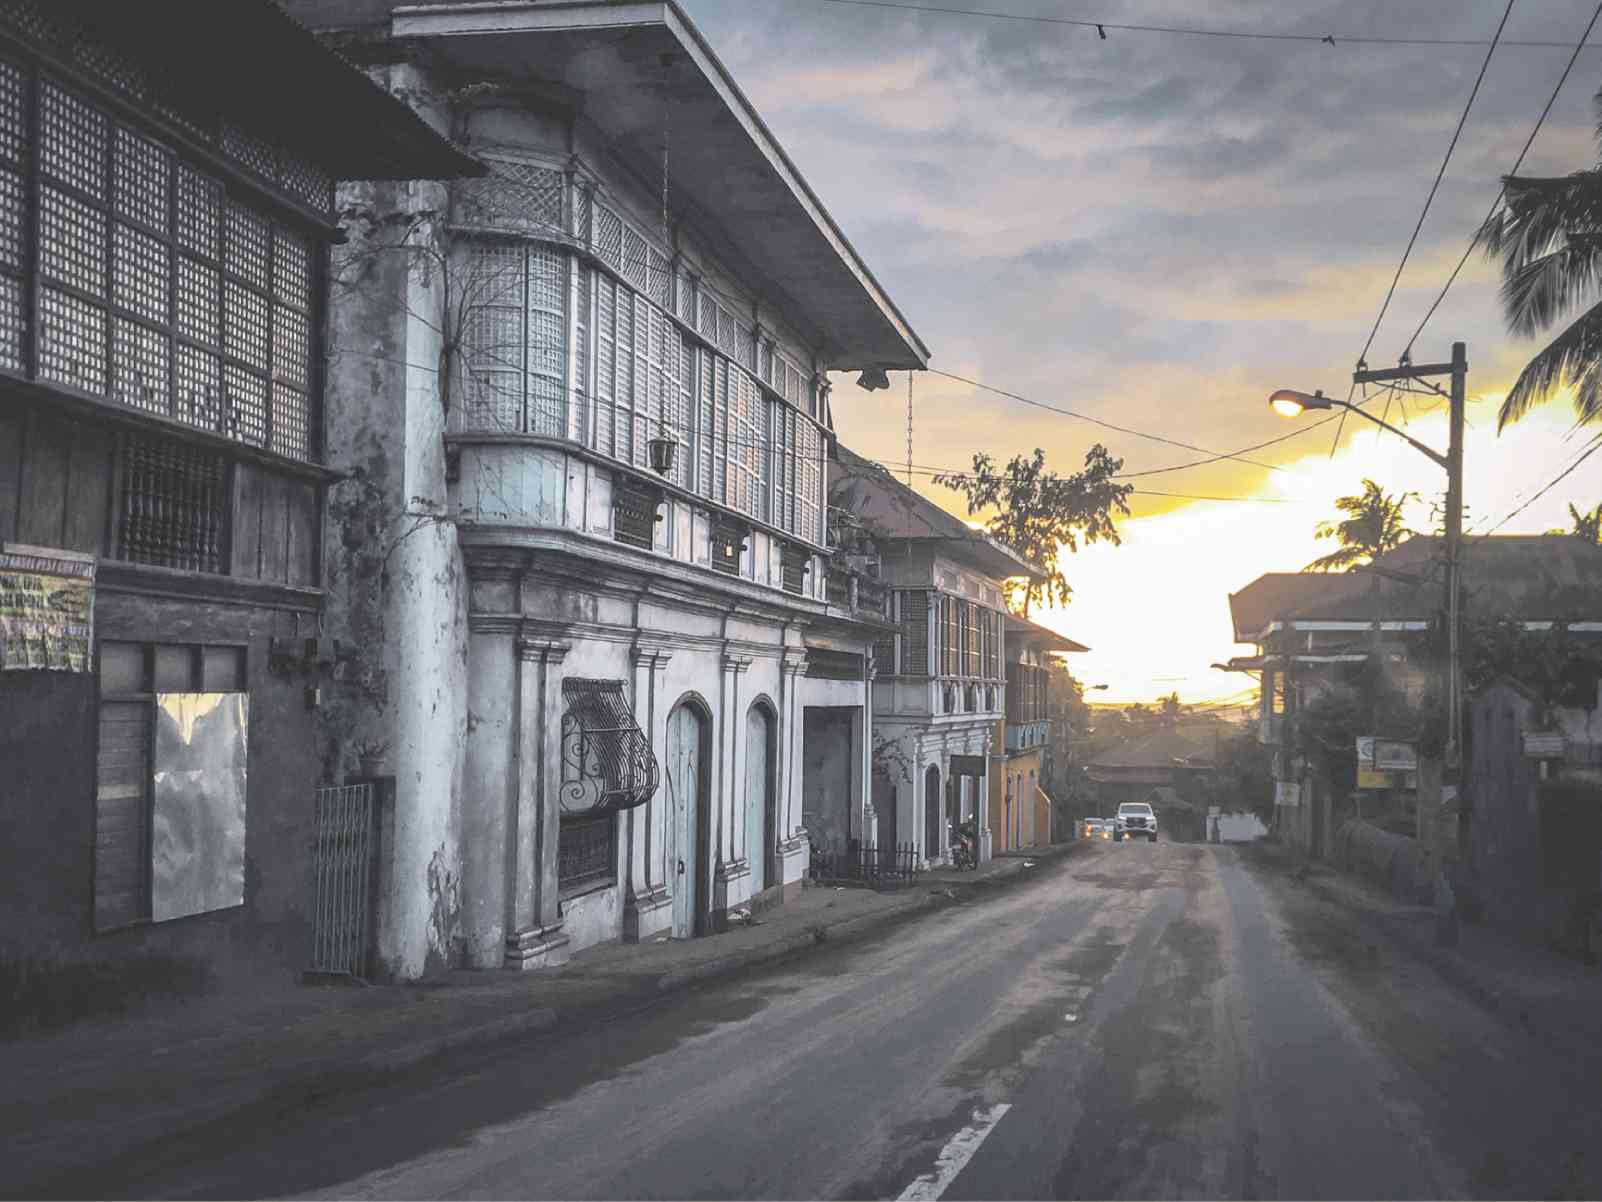 Ash-covered street in Taal